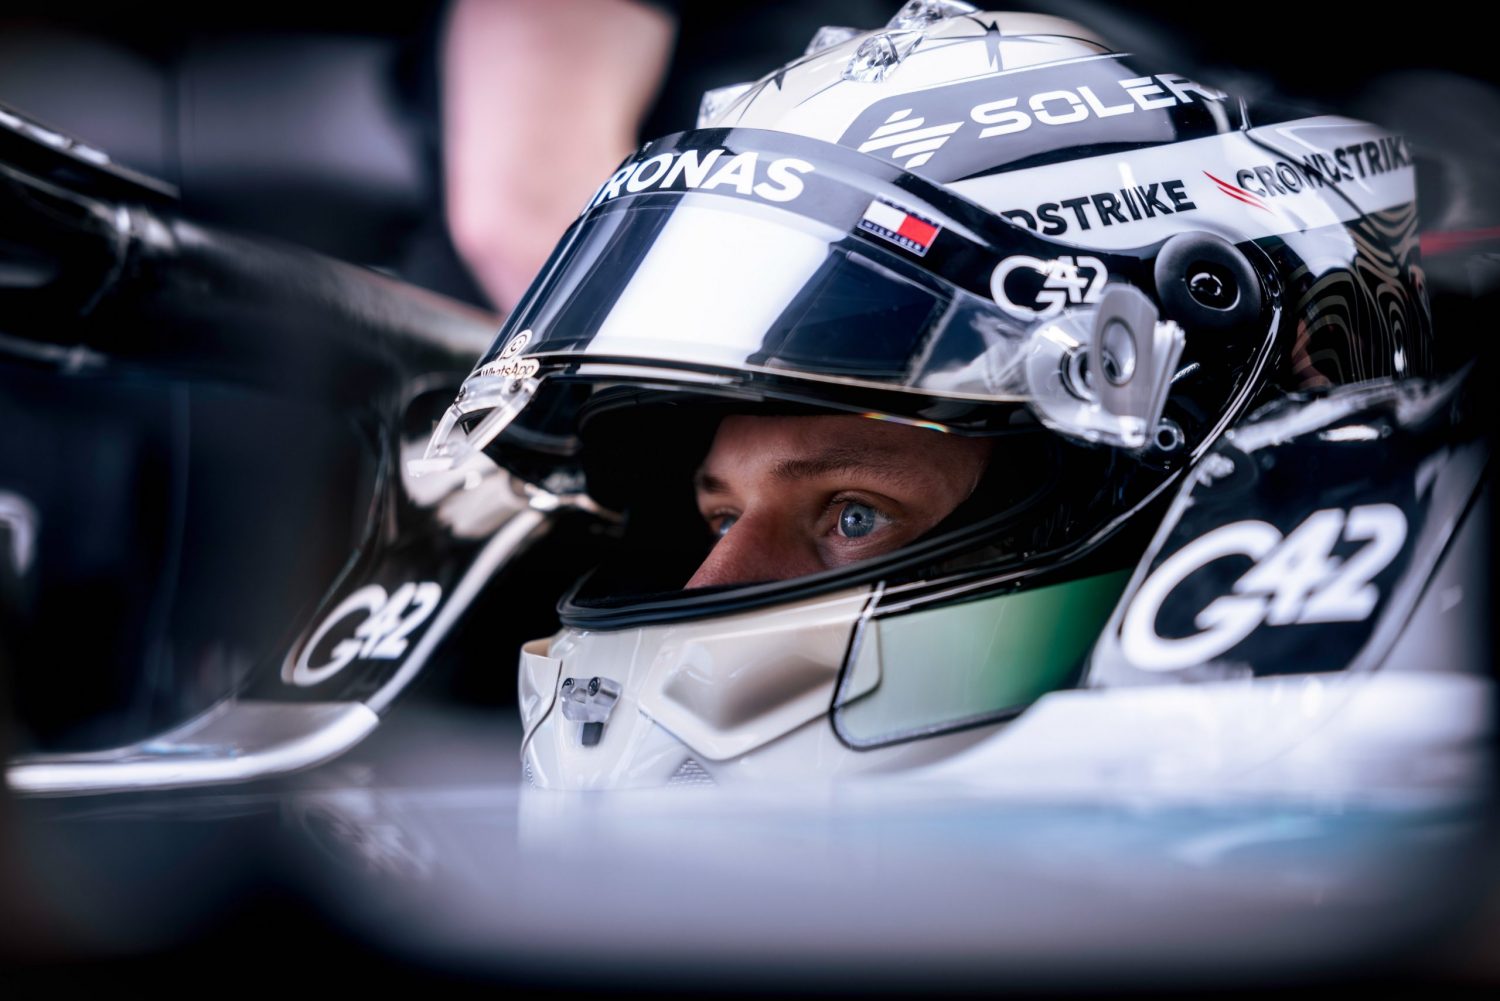 Schumacher admits to ‘exhausting’ fight, but won’t let go of F1